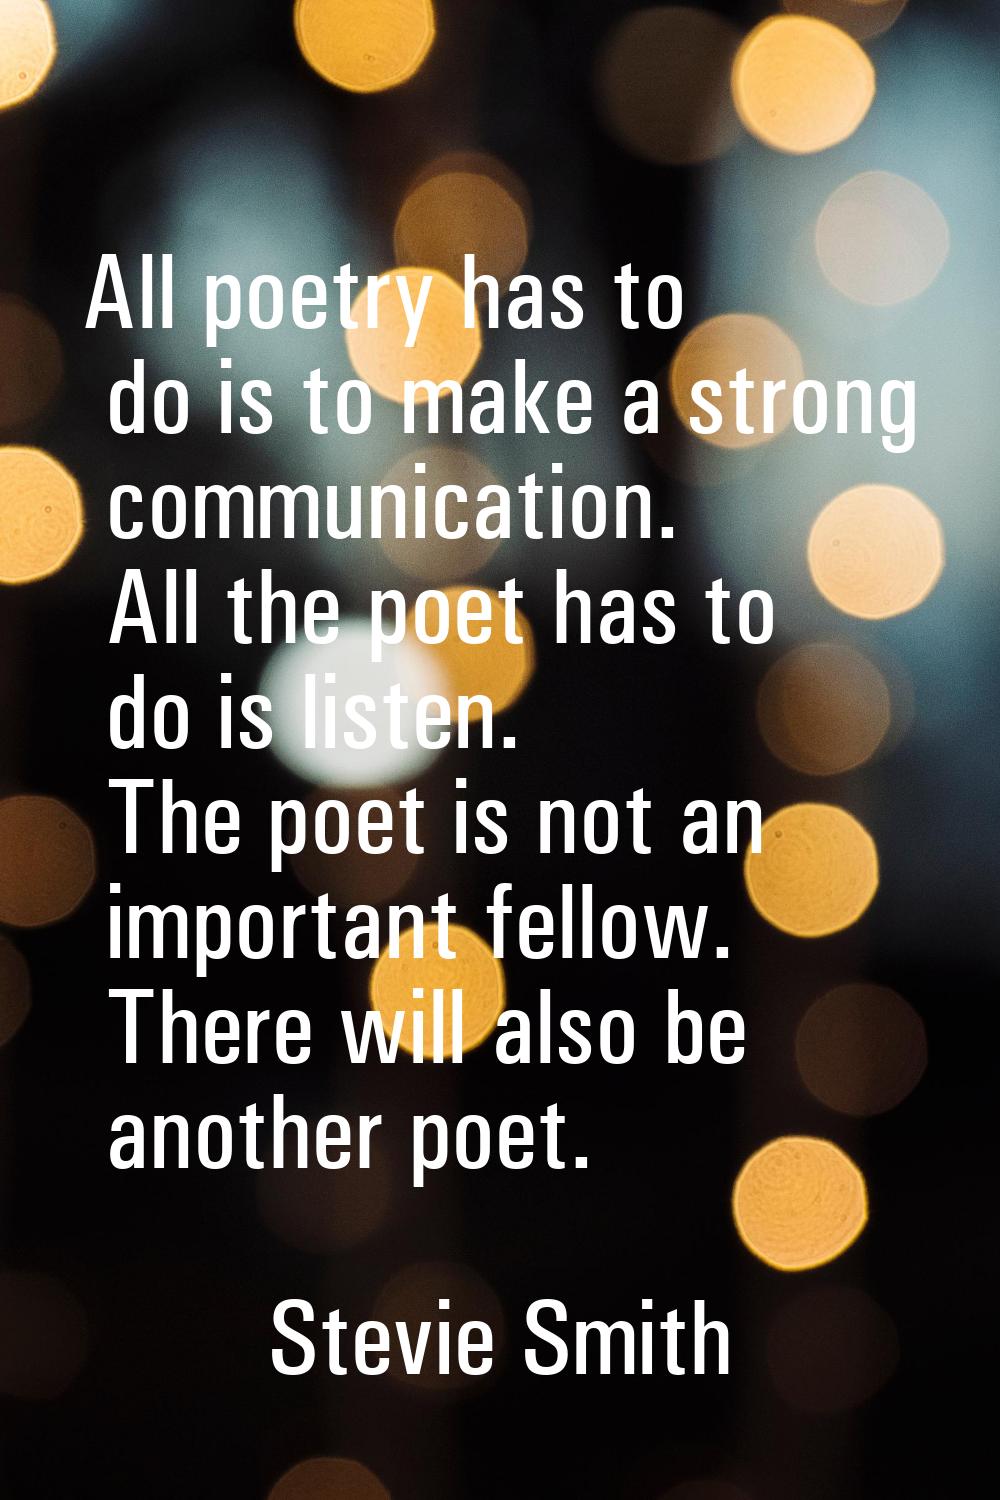 All poetry has to do is to make a strong communication. All the poet has to do is listen. The poet 